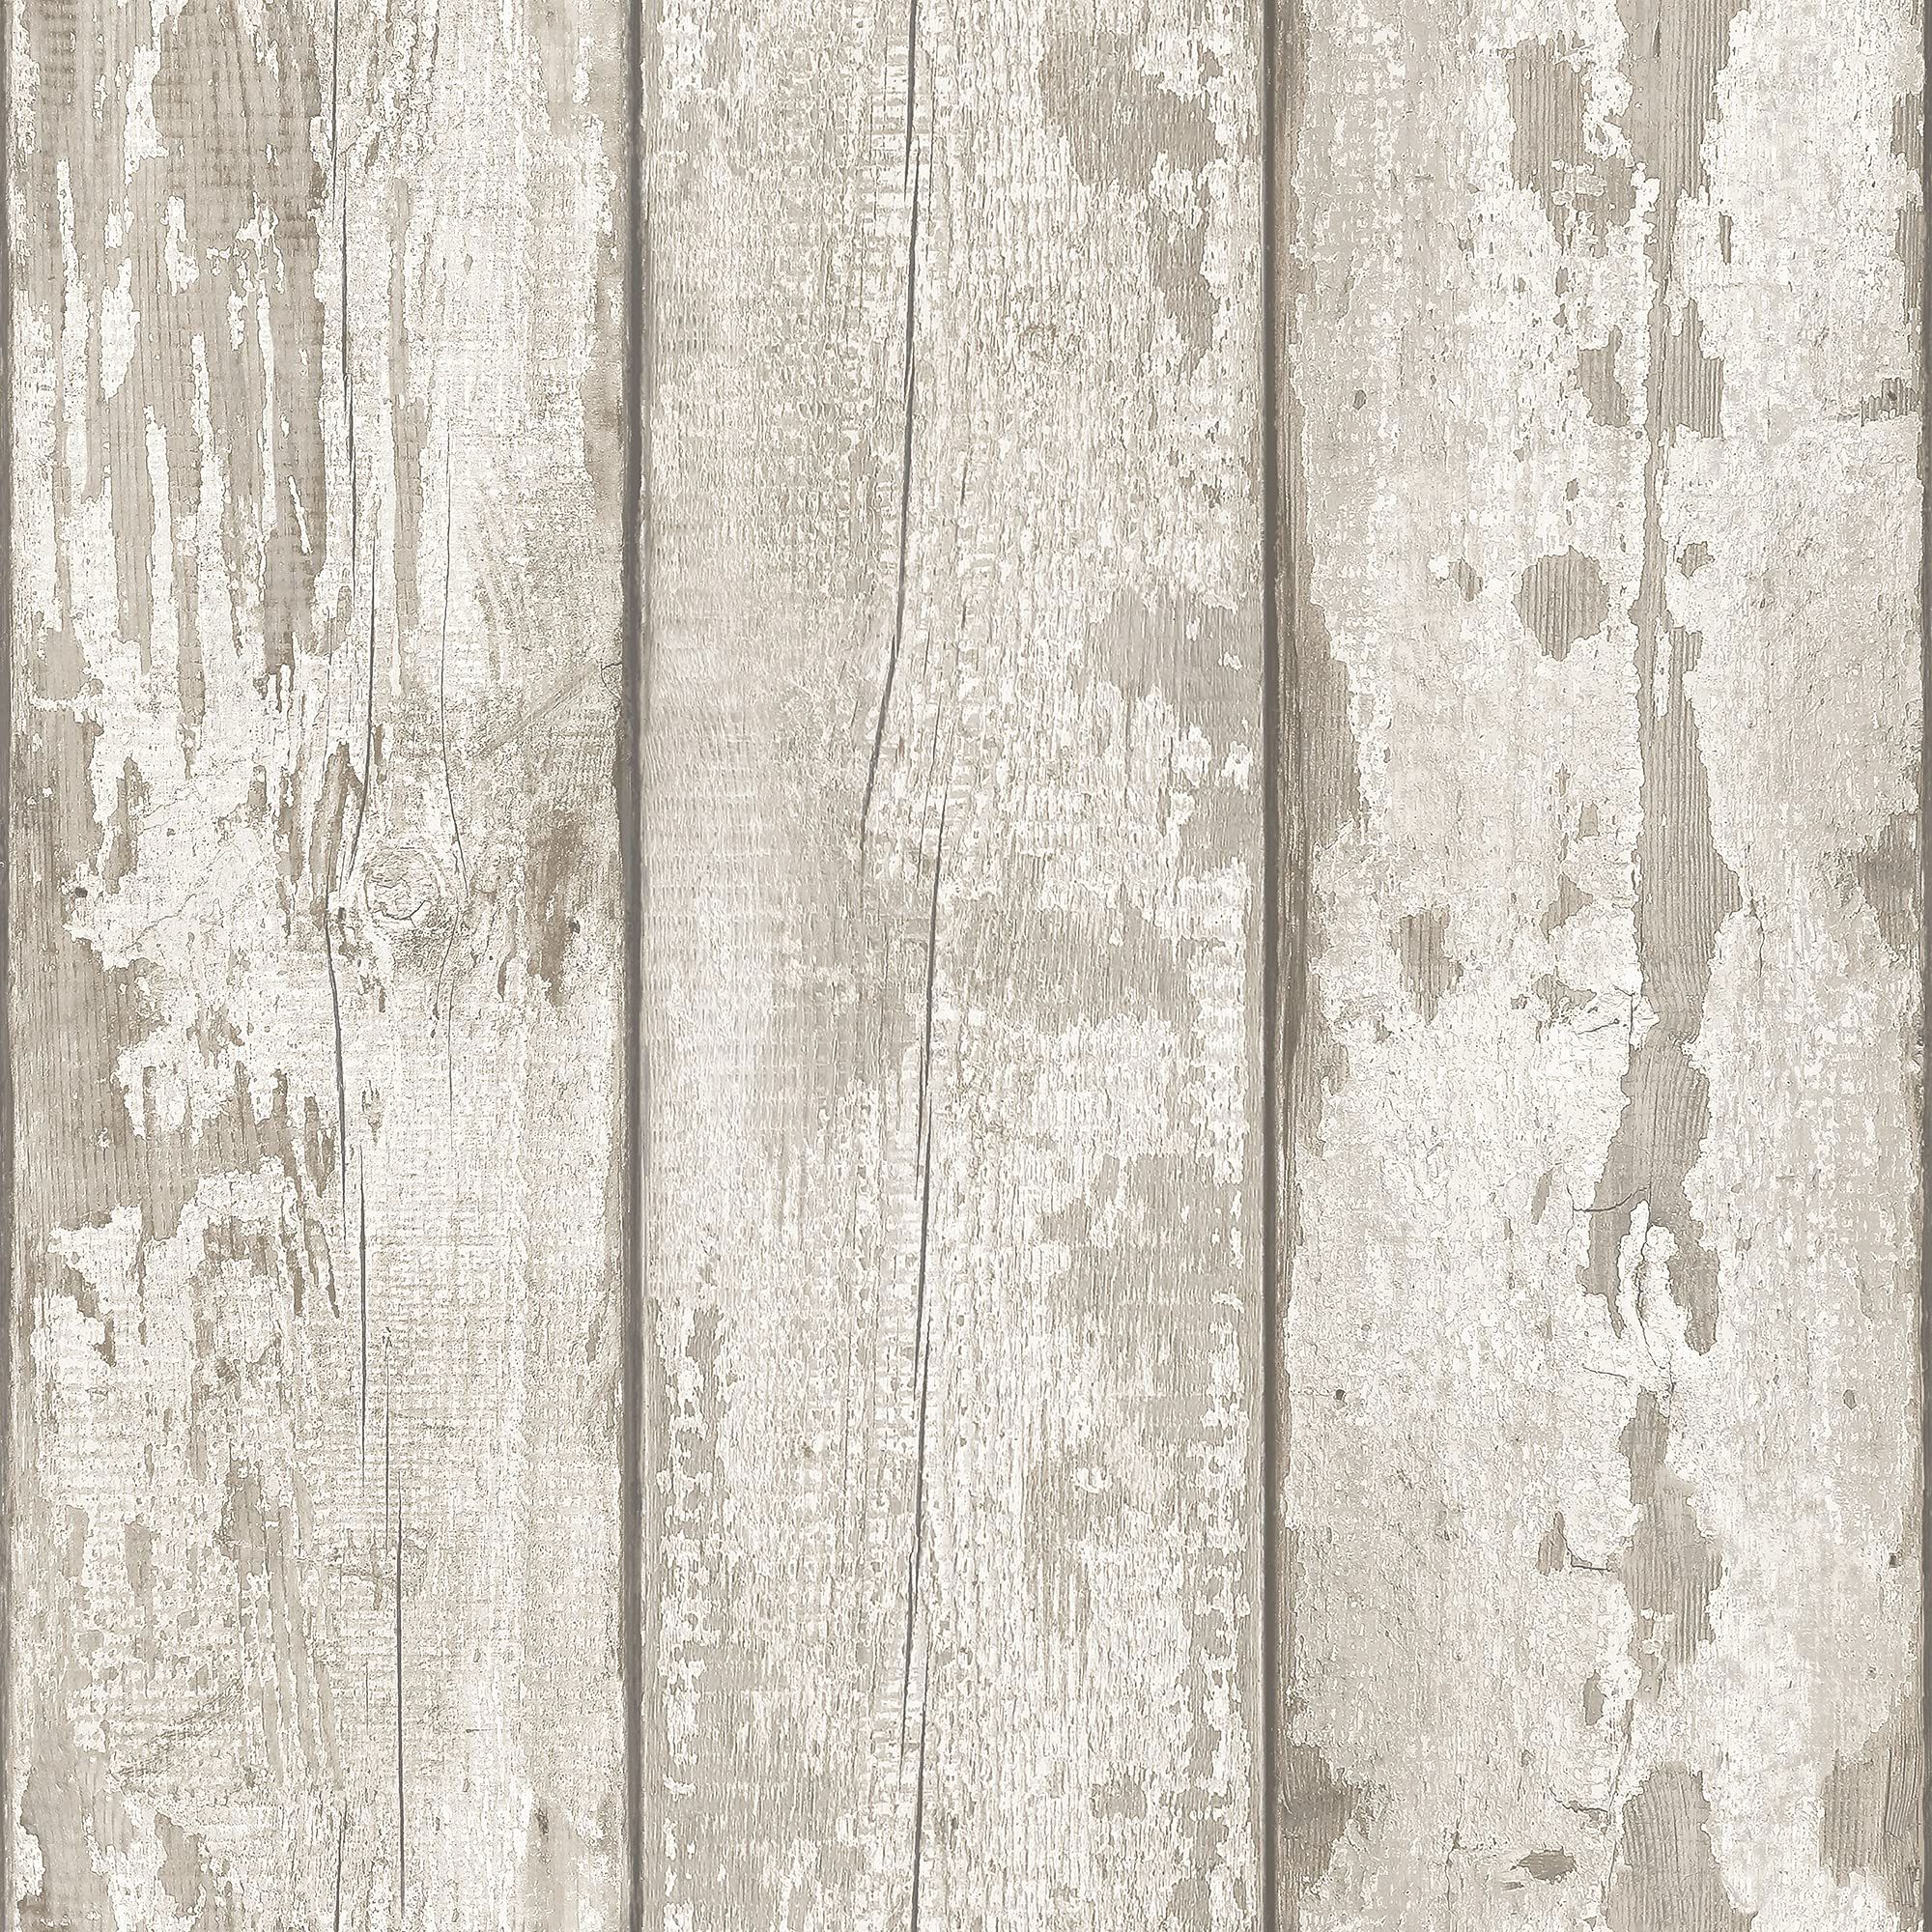 Arthouse Whitewashed Wood Effect Wallpaper Effect Look Distressed Weathered Style Design, Brown Color Wallp. White wood wallpaper, Wood effect wallpaper, Wood wallpaper